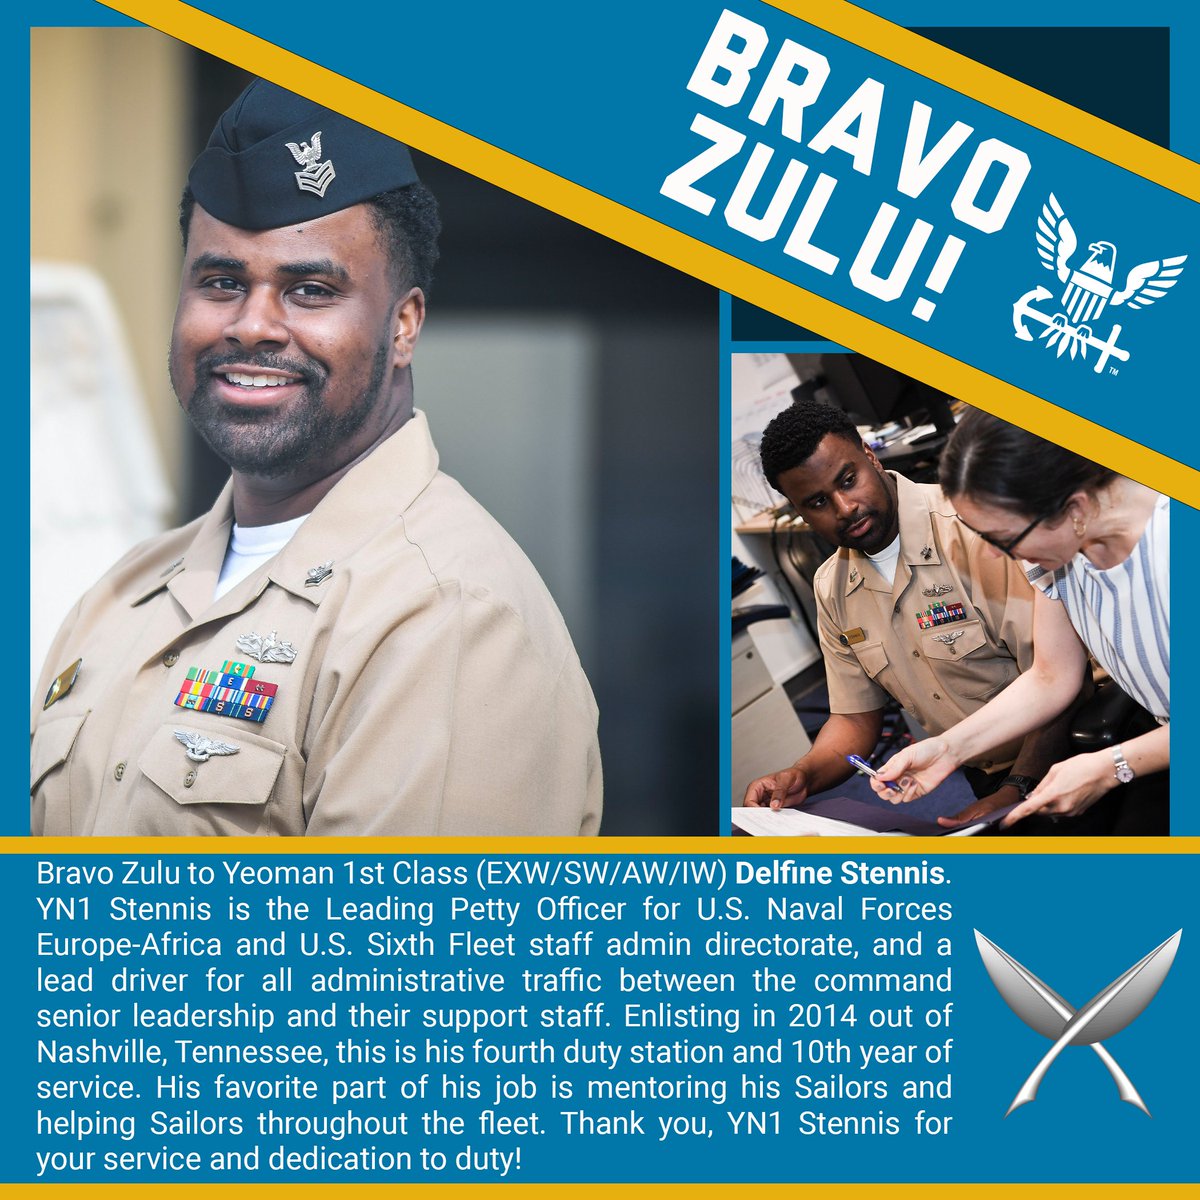 ⚓ Bravo Zulu to Yeoman 1st Class (EXW/SW/AW/IW) Delfine Stennis!

YN1 Stennis is the Leading Petty Officer for U.S. Naval Forces Europe-Africa and U.S. Sixth Fleet staff admin directorate, and a lead driver for all administrative traffic between the command senior leadership and